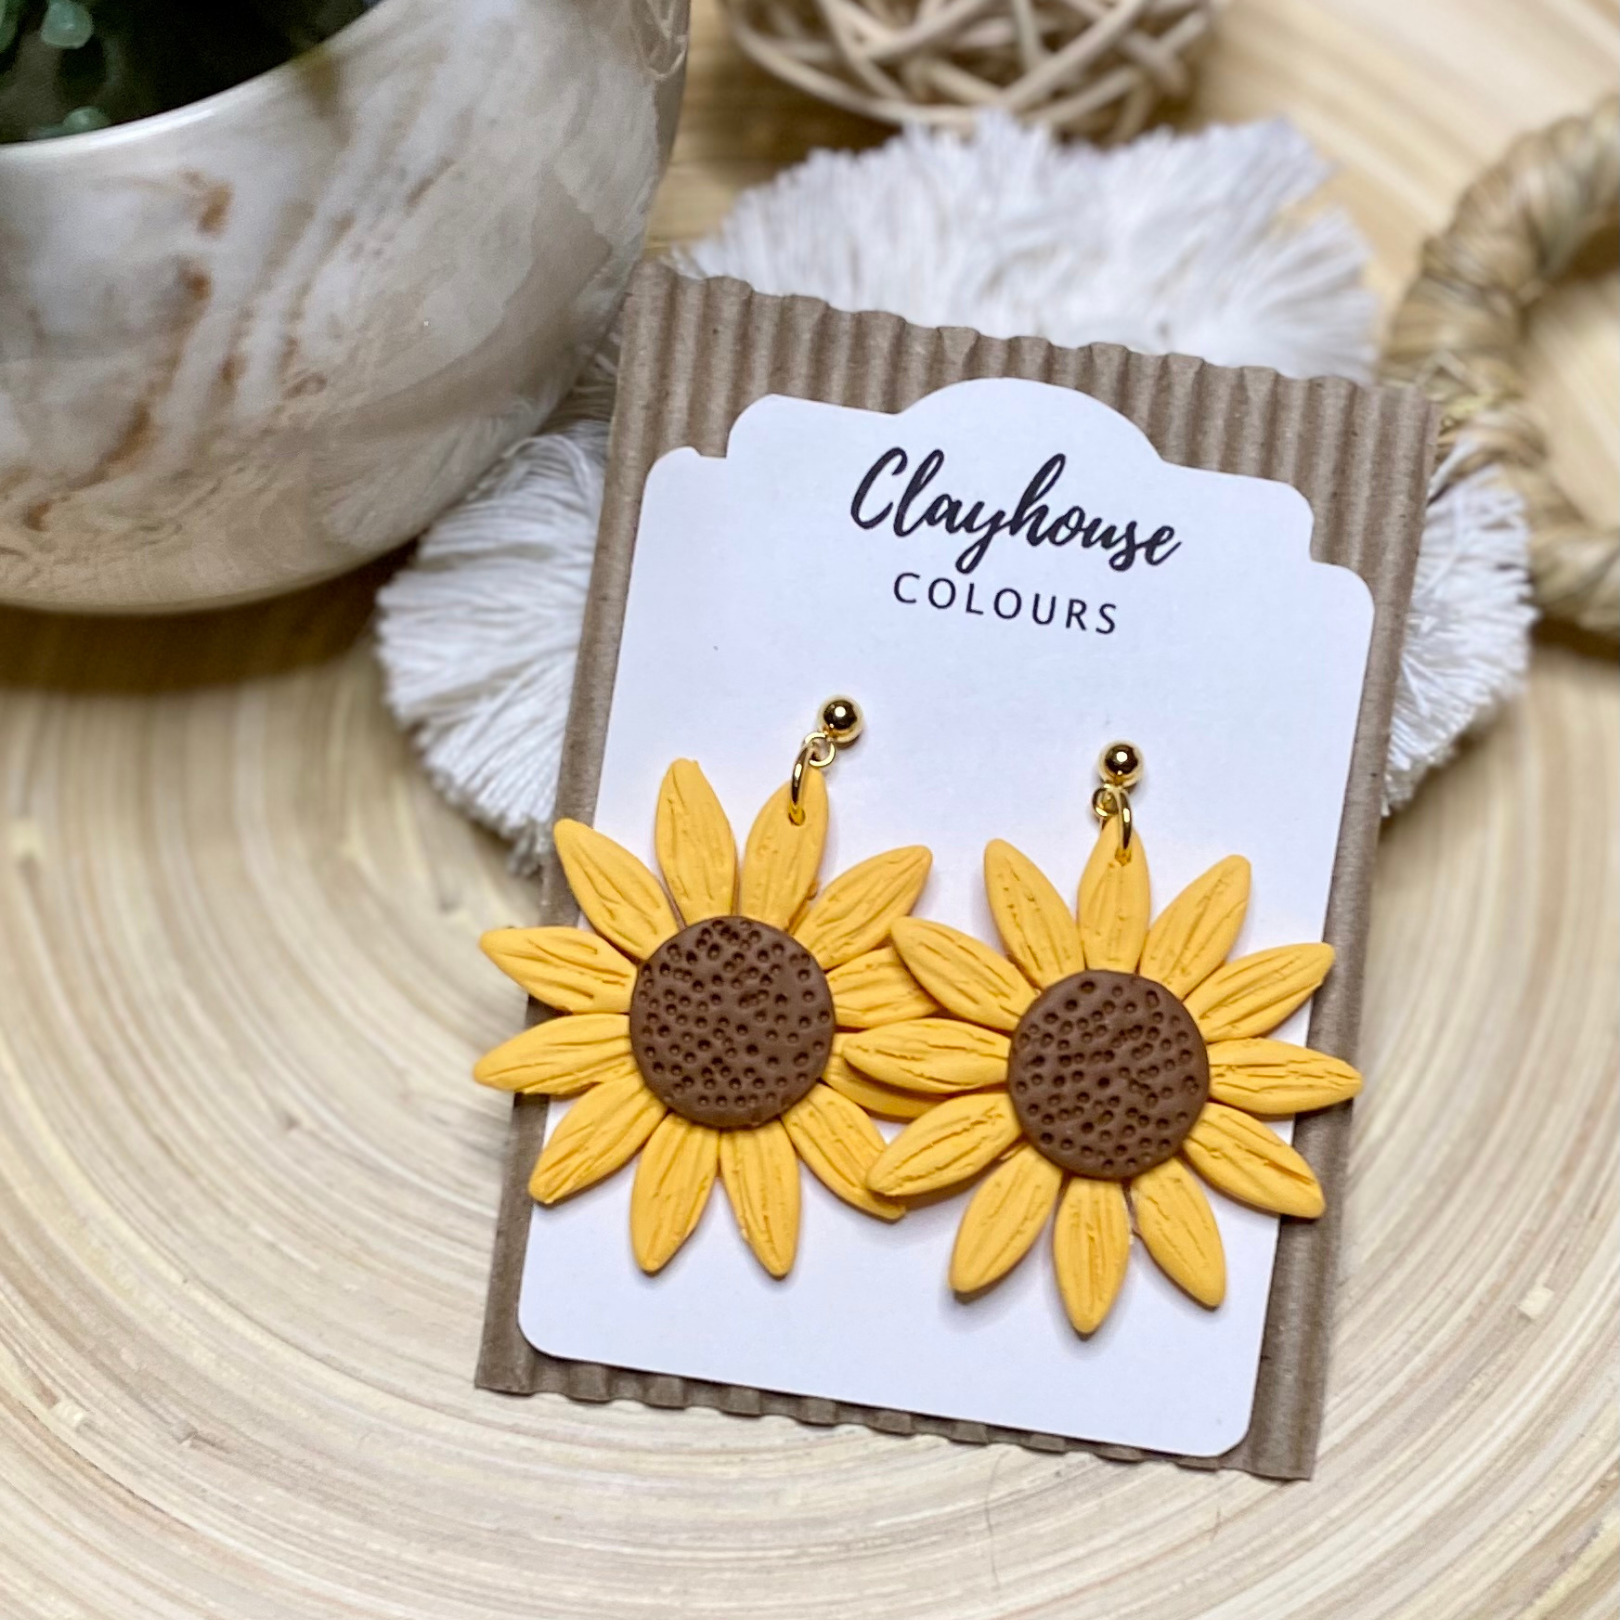 Clayhouse Colours - Large Sunflower